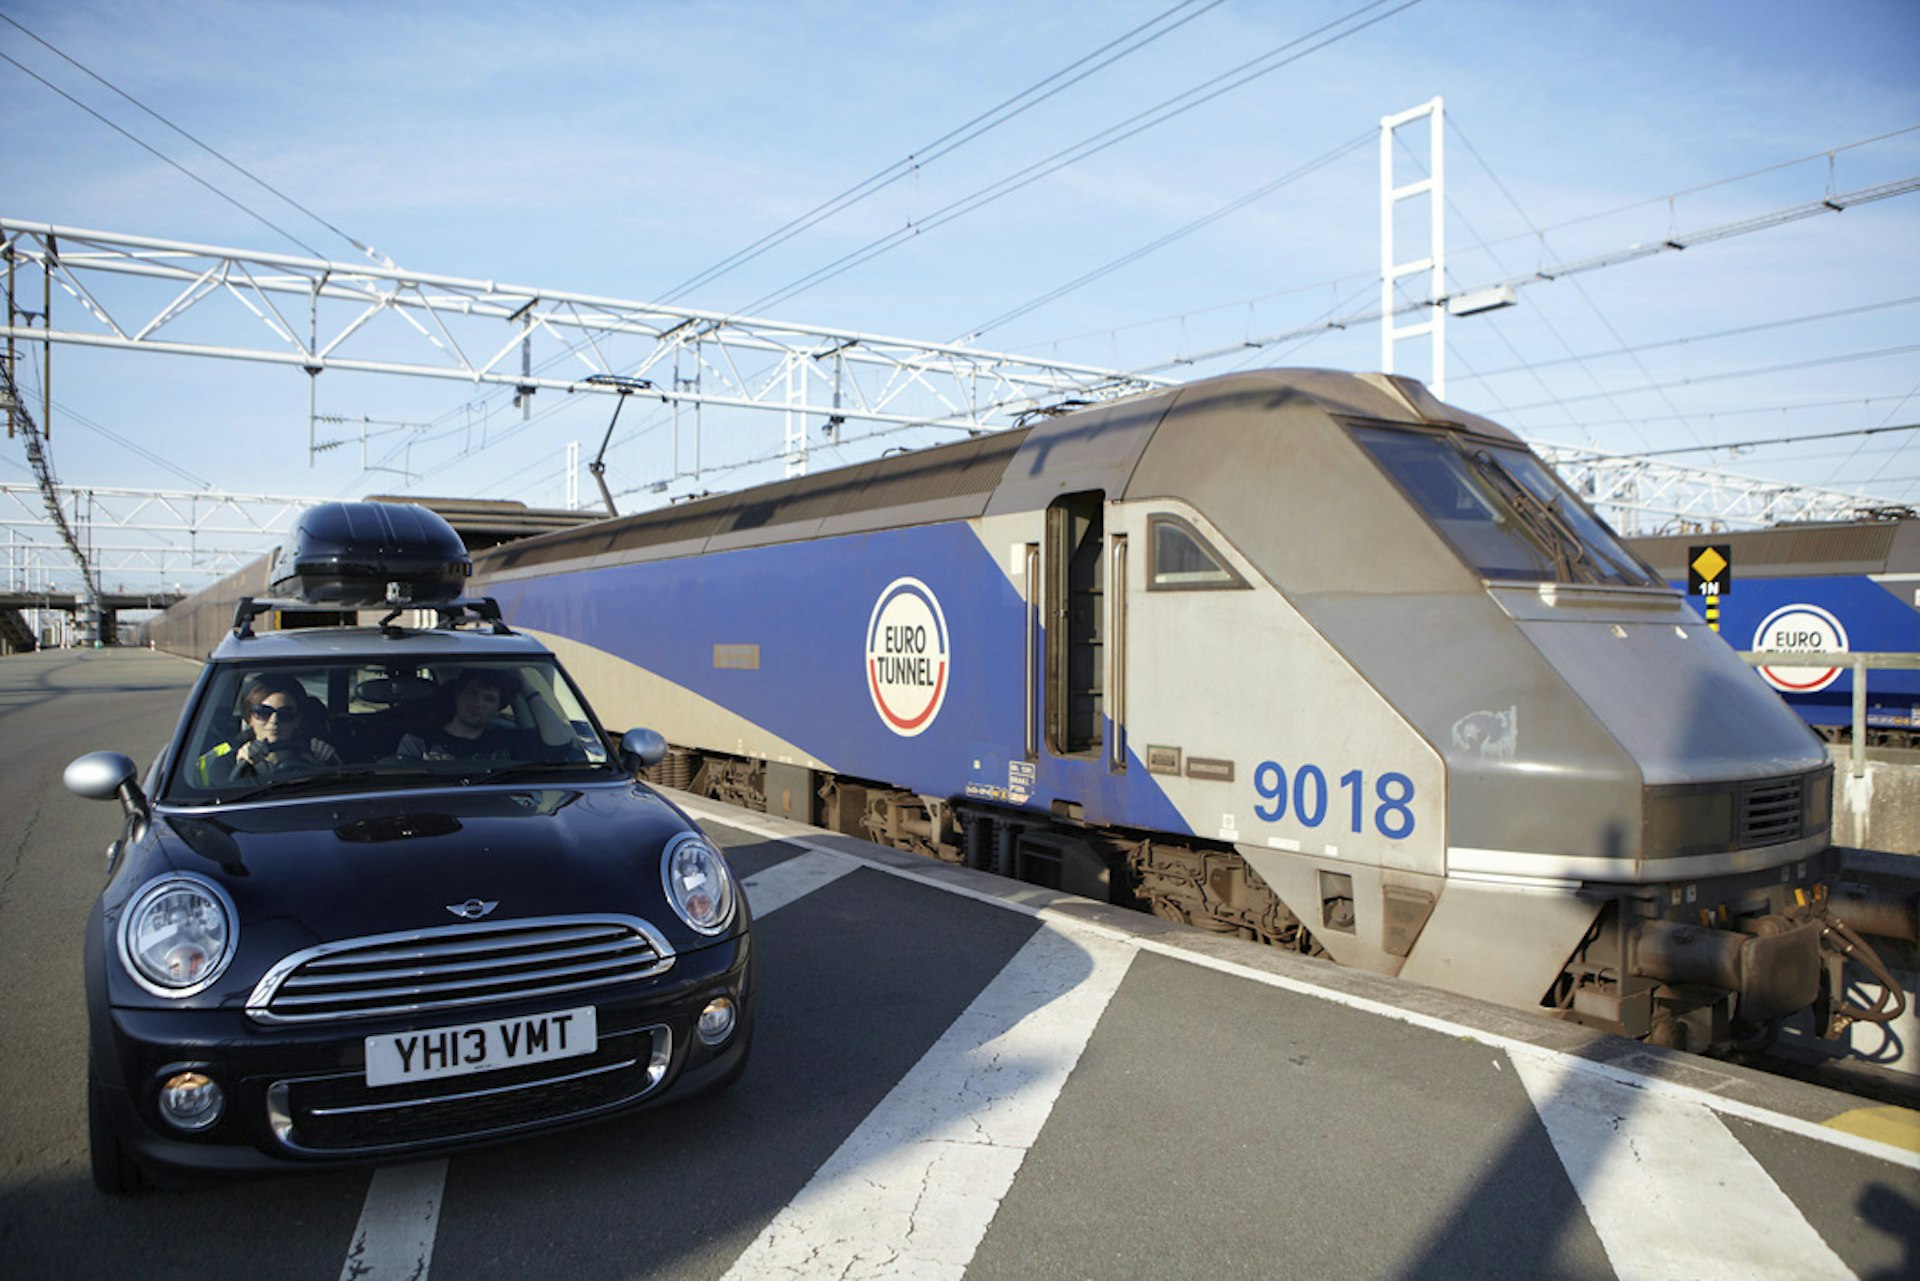 A dark colored Mini parked by the front of a Eurotunnel train 